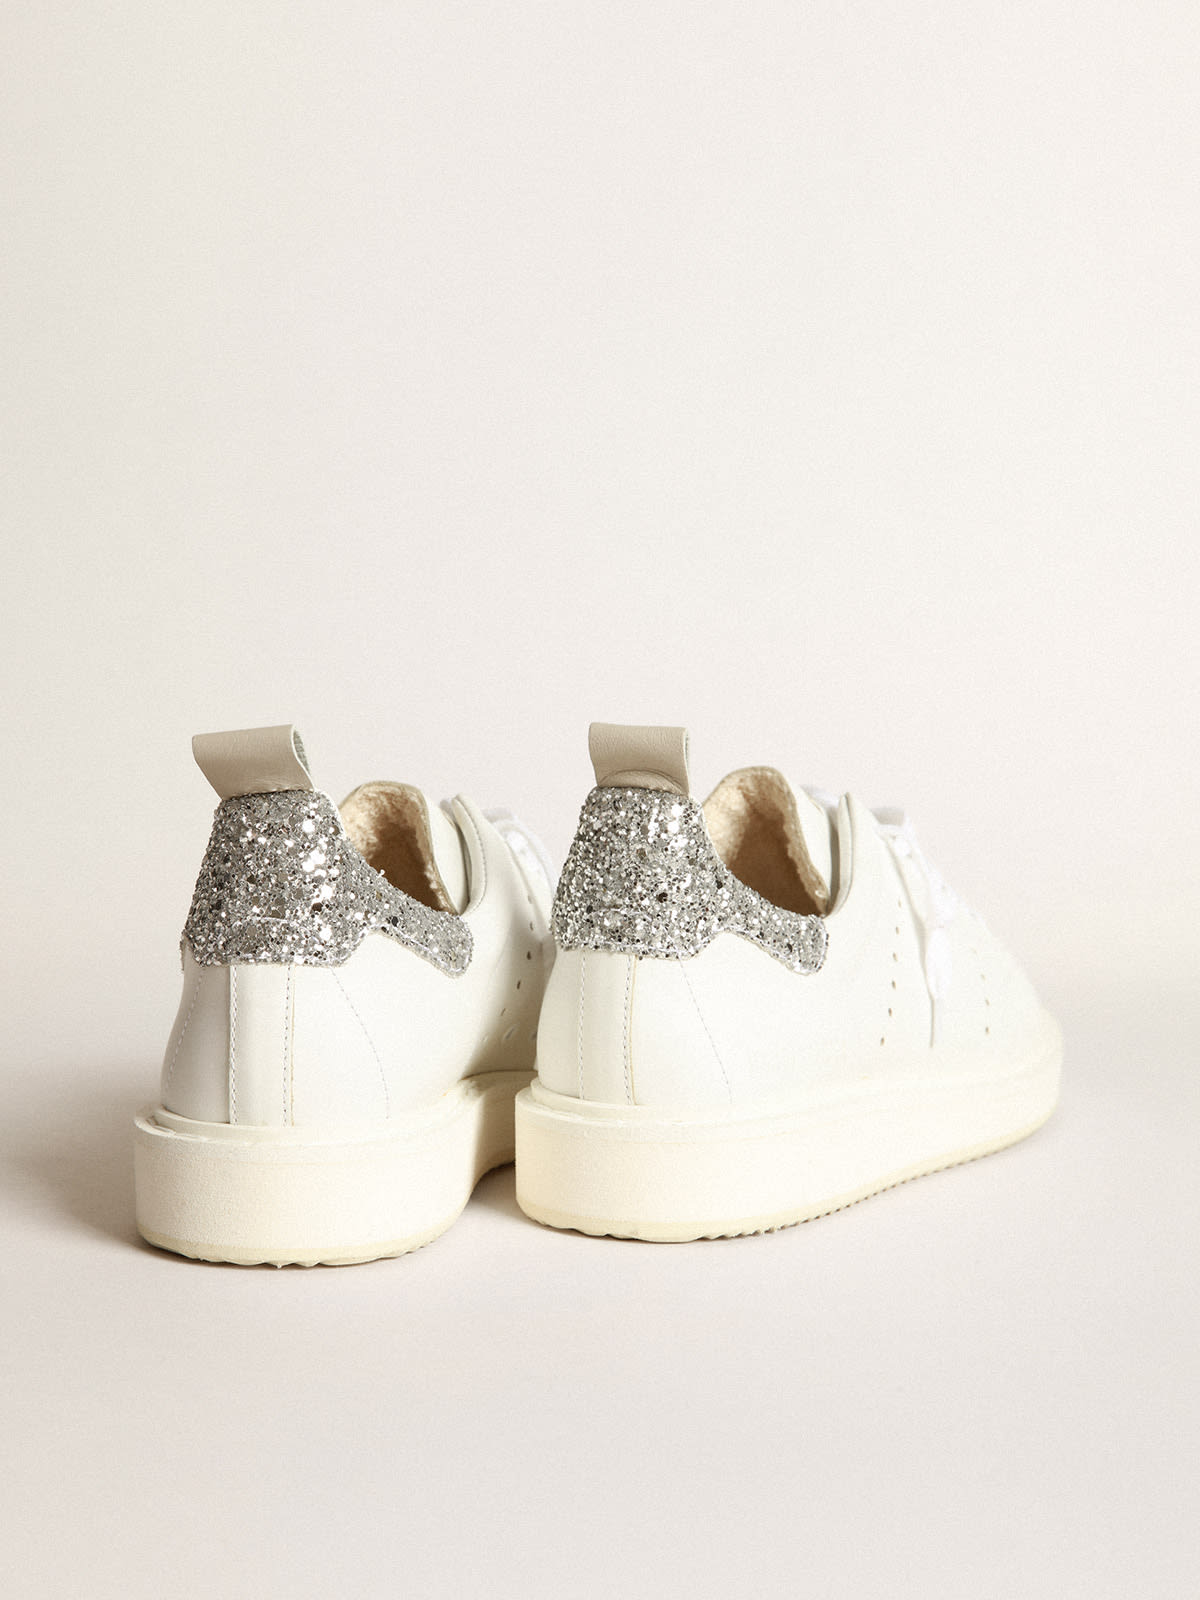 Golden Goose - Starter sneakers in white leather with silver glitter heel tab in 